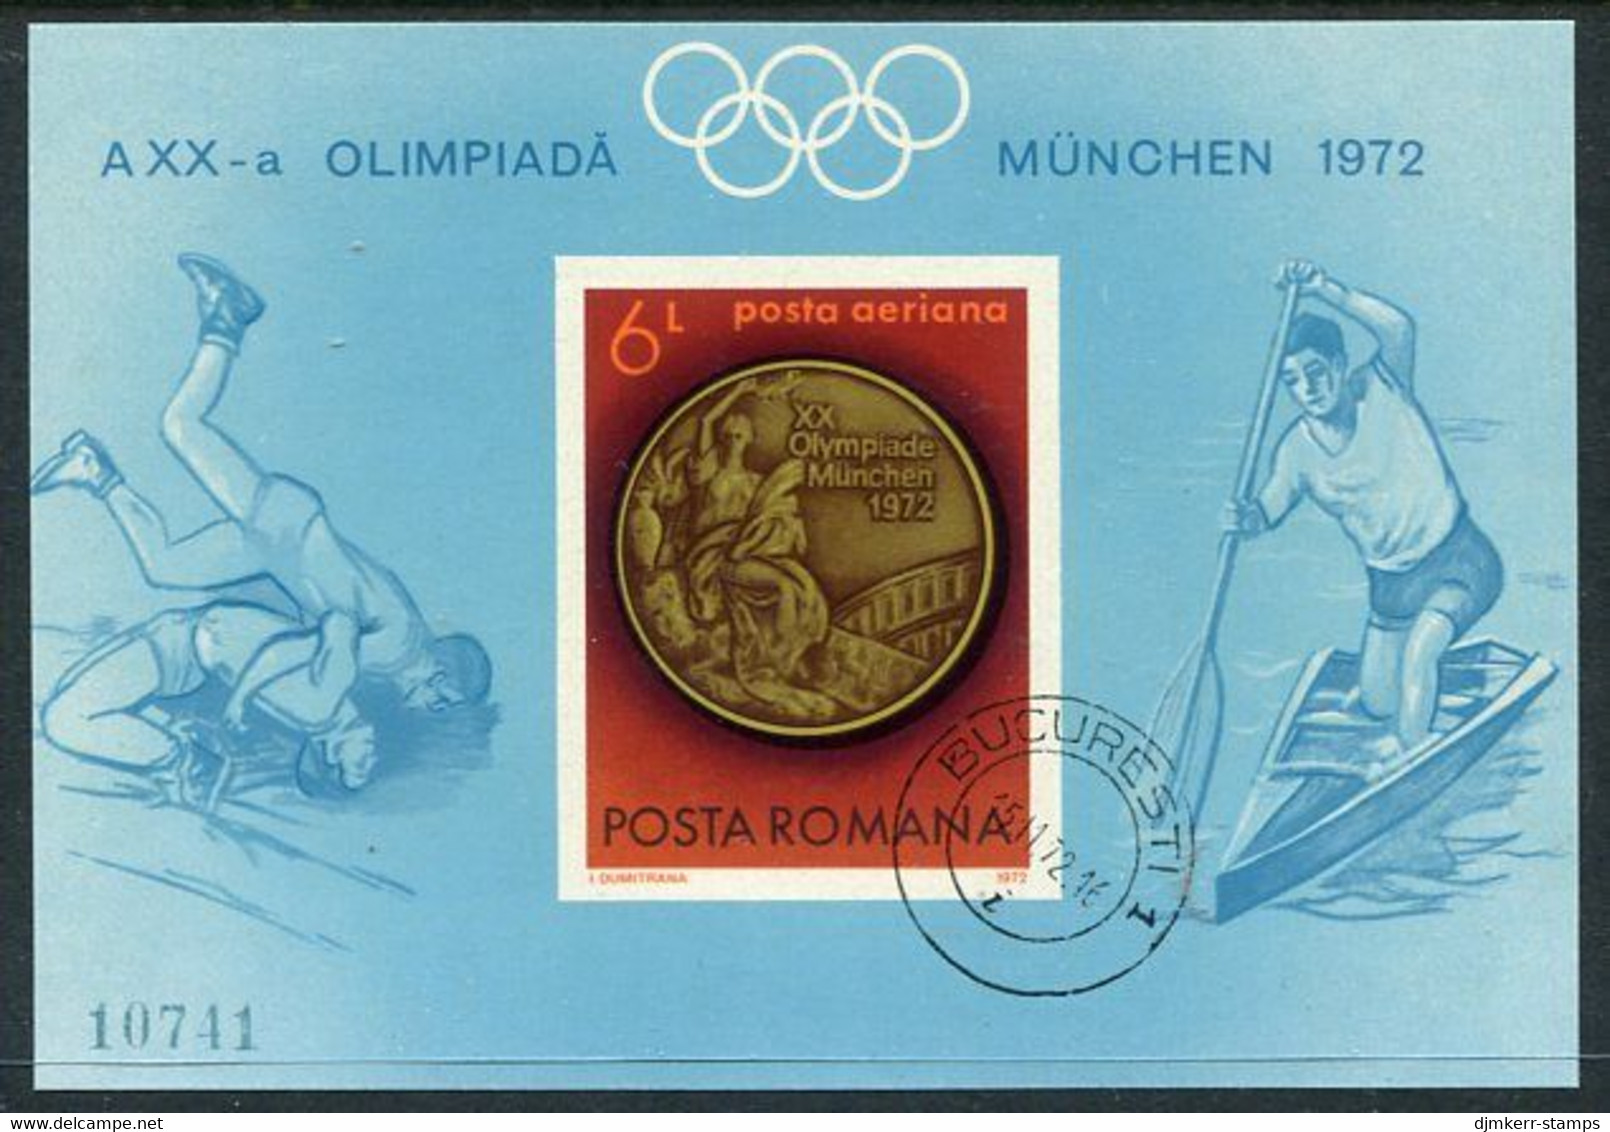 ROMANIA 1972 Olympic Medals Imperforate Block Used.  Michel Block 101 - Usado